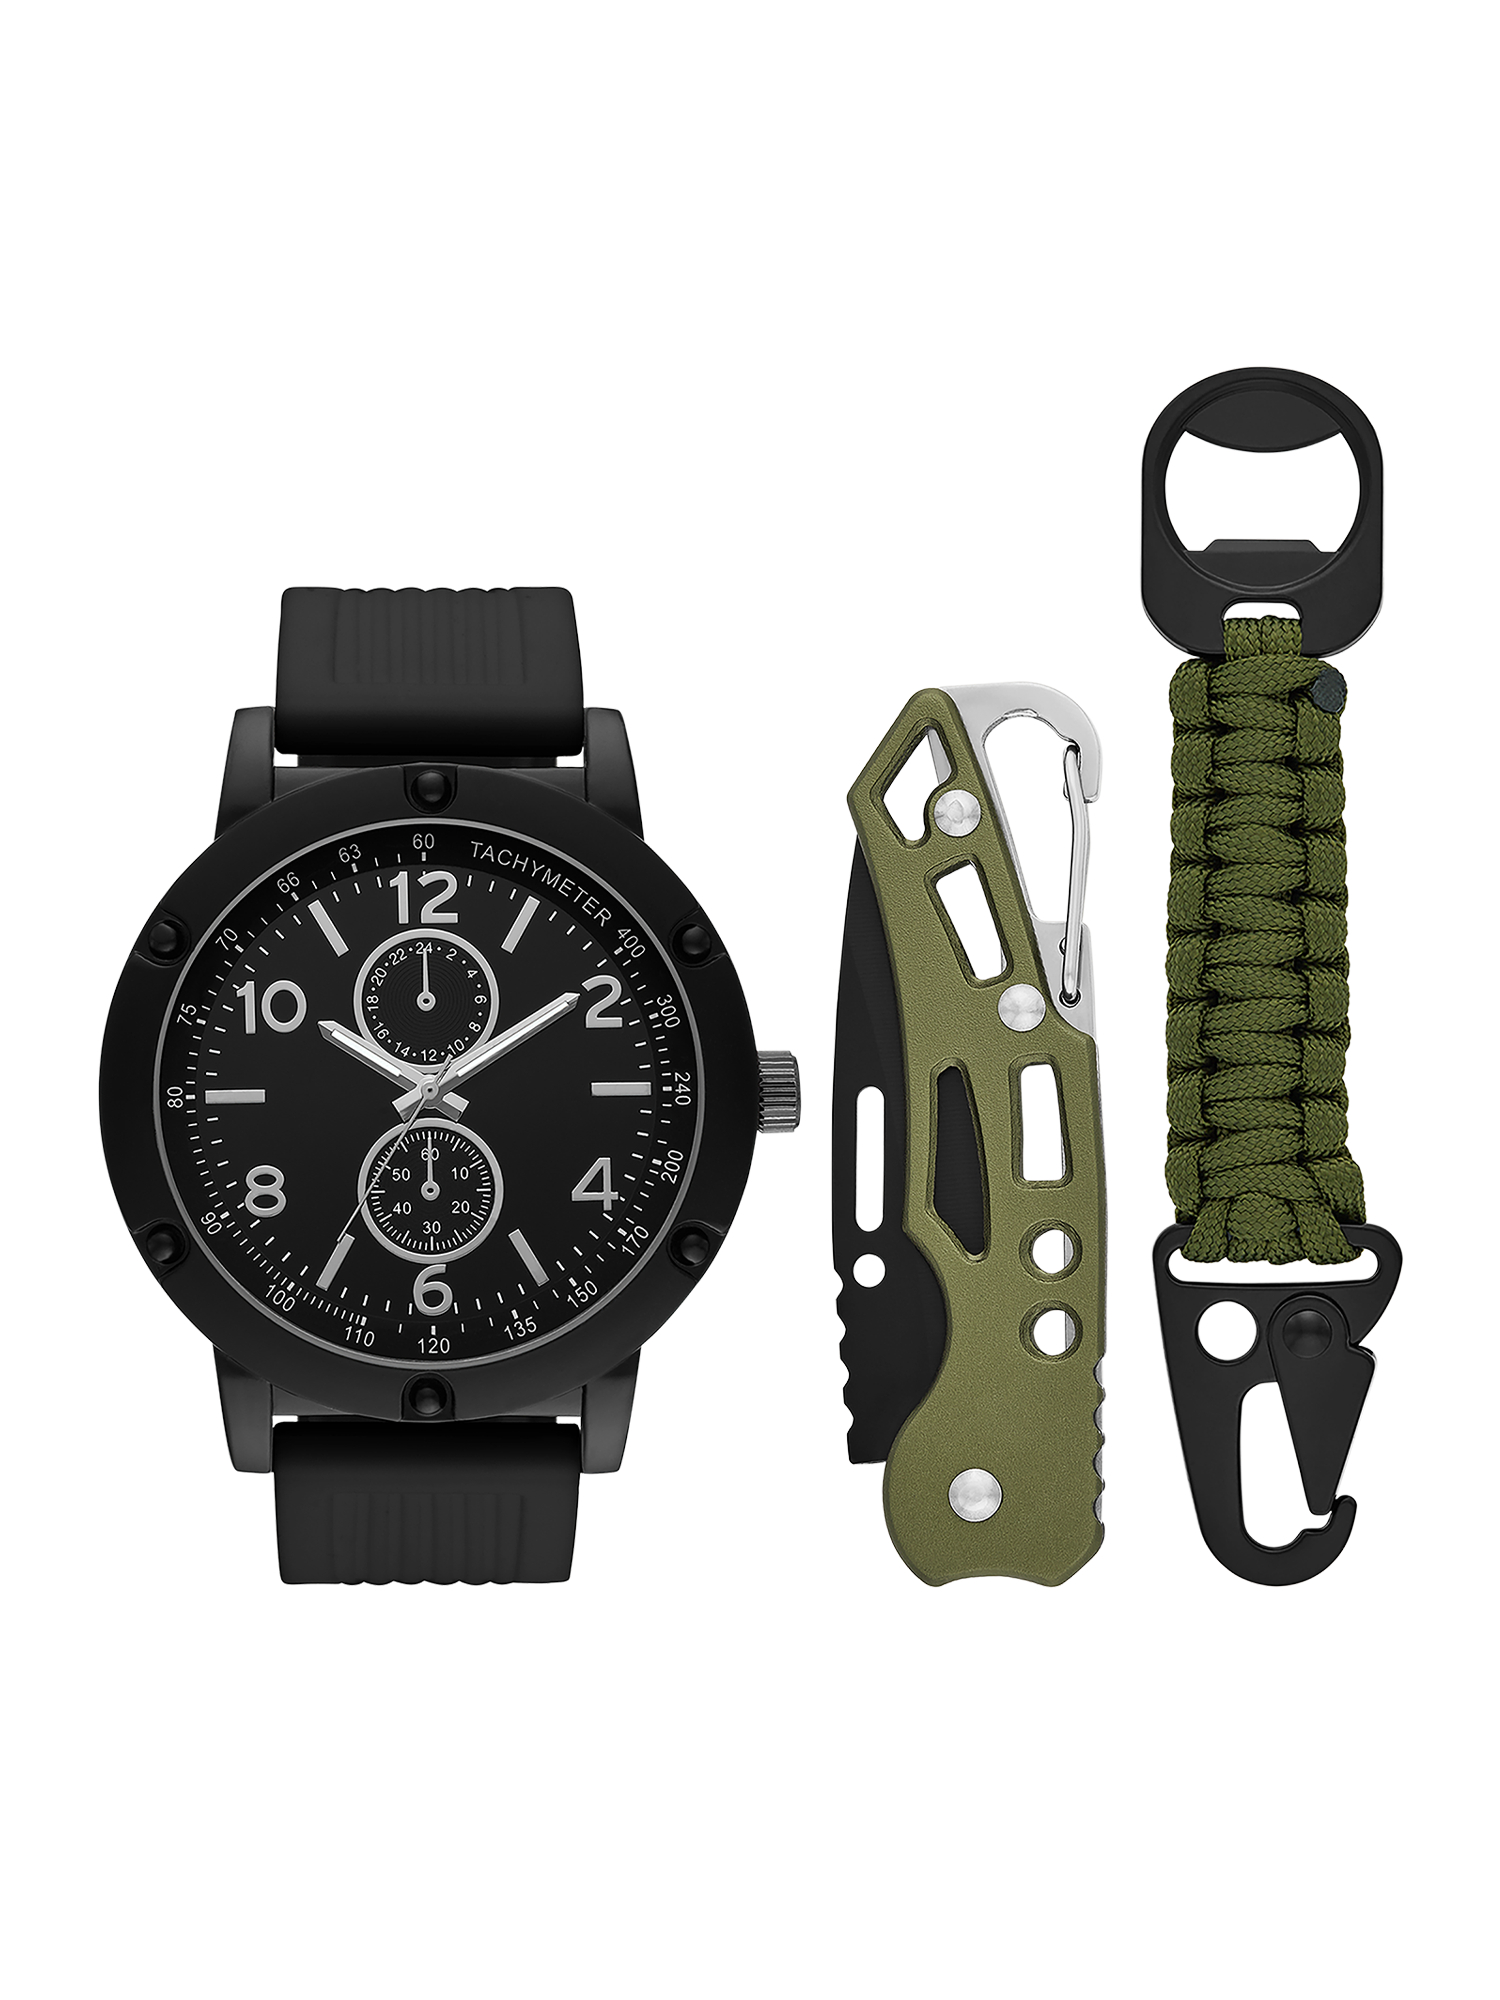 Folio Men's Matte Black Round Analog Watch with Black Silicone Strap, Green Braided Rope Bracelet and Green Multi-tool Gift Set (FMDAL1145) - image 1 of 3